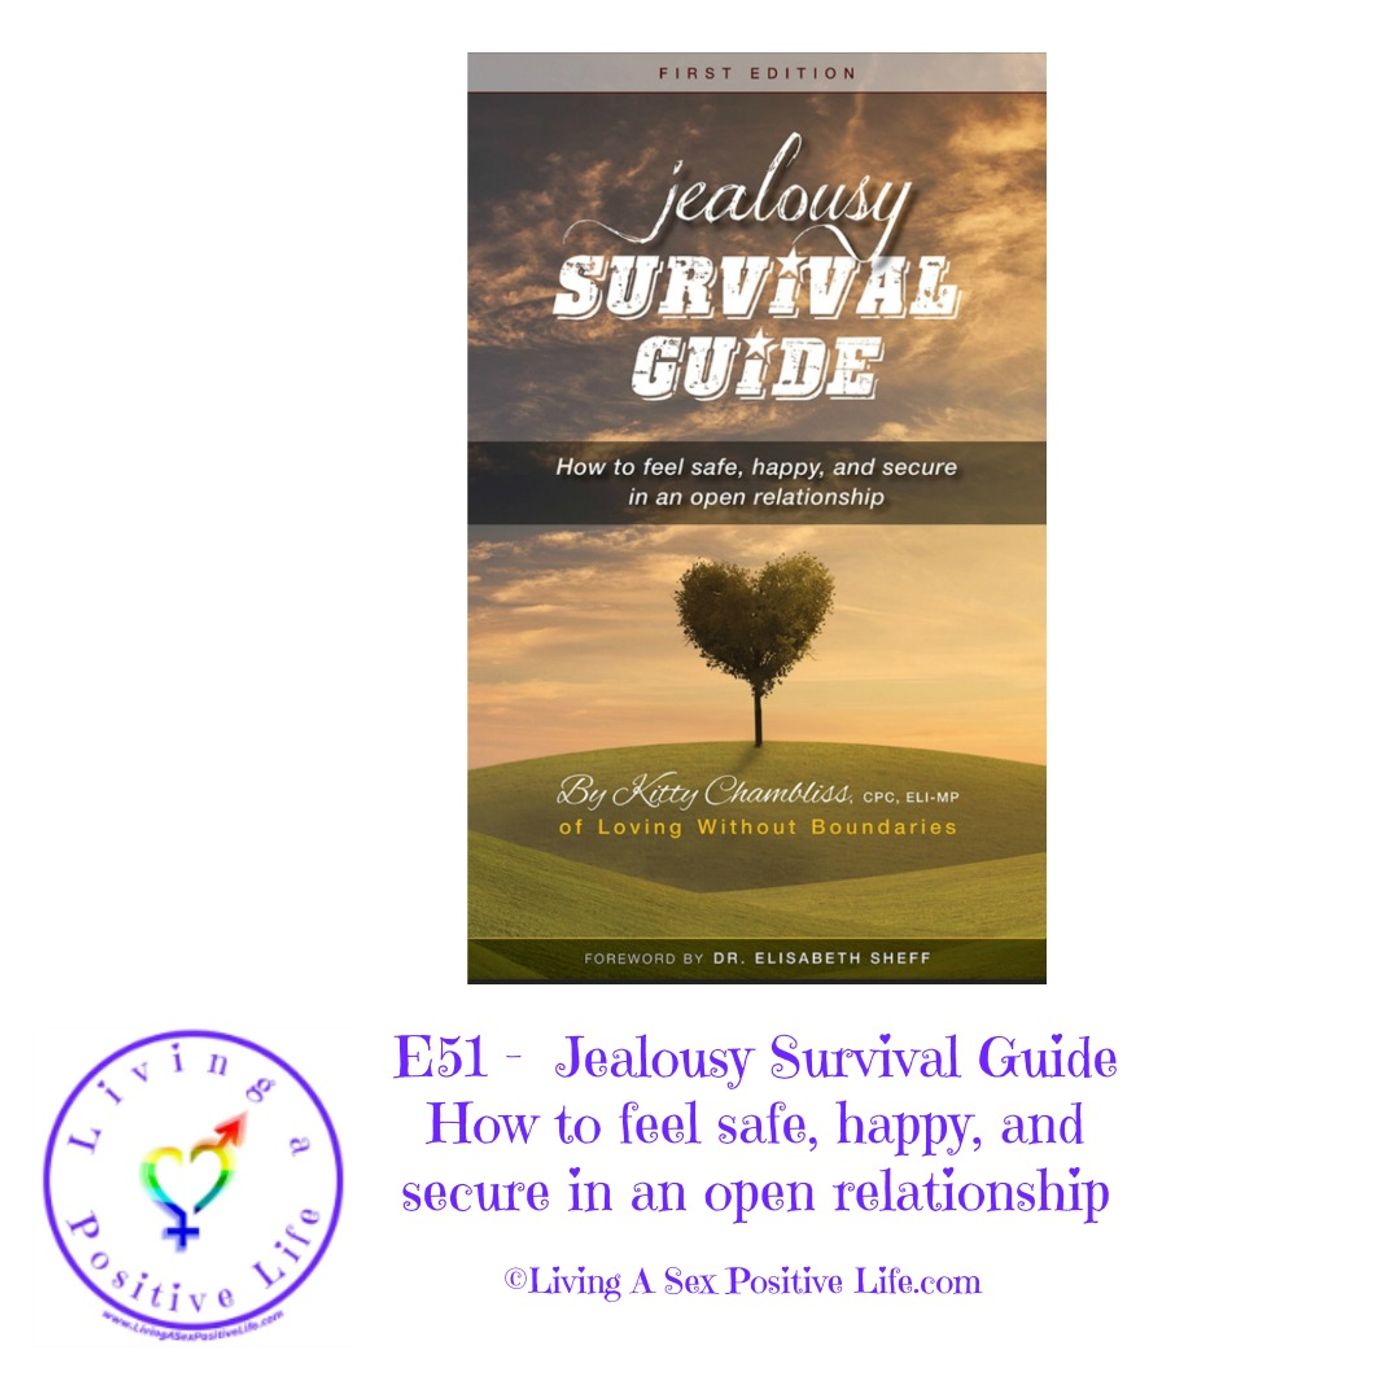 Sex Positive Me - E51 -  Jealousy Survival Guide: How to feel safe, happy, and secure in an open relationship